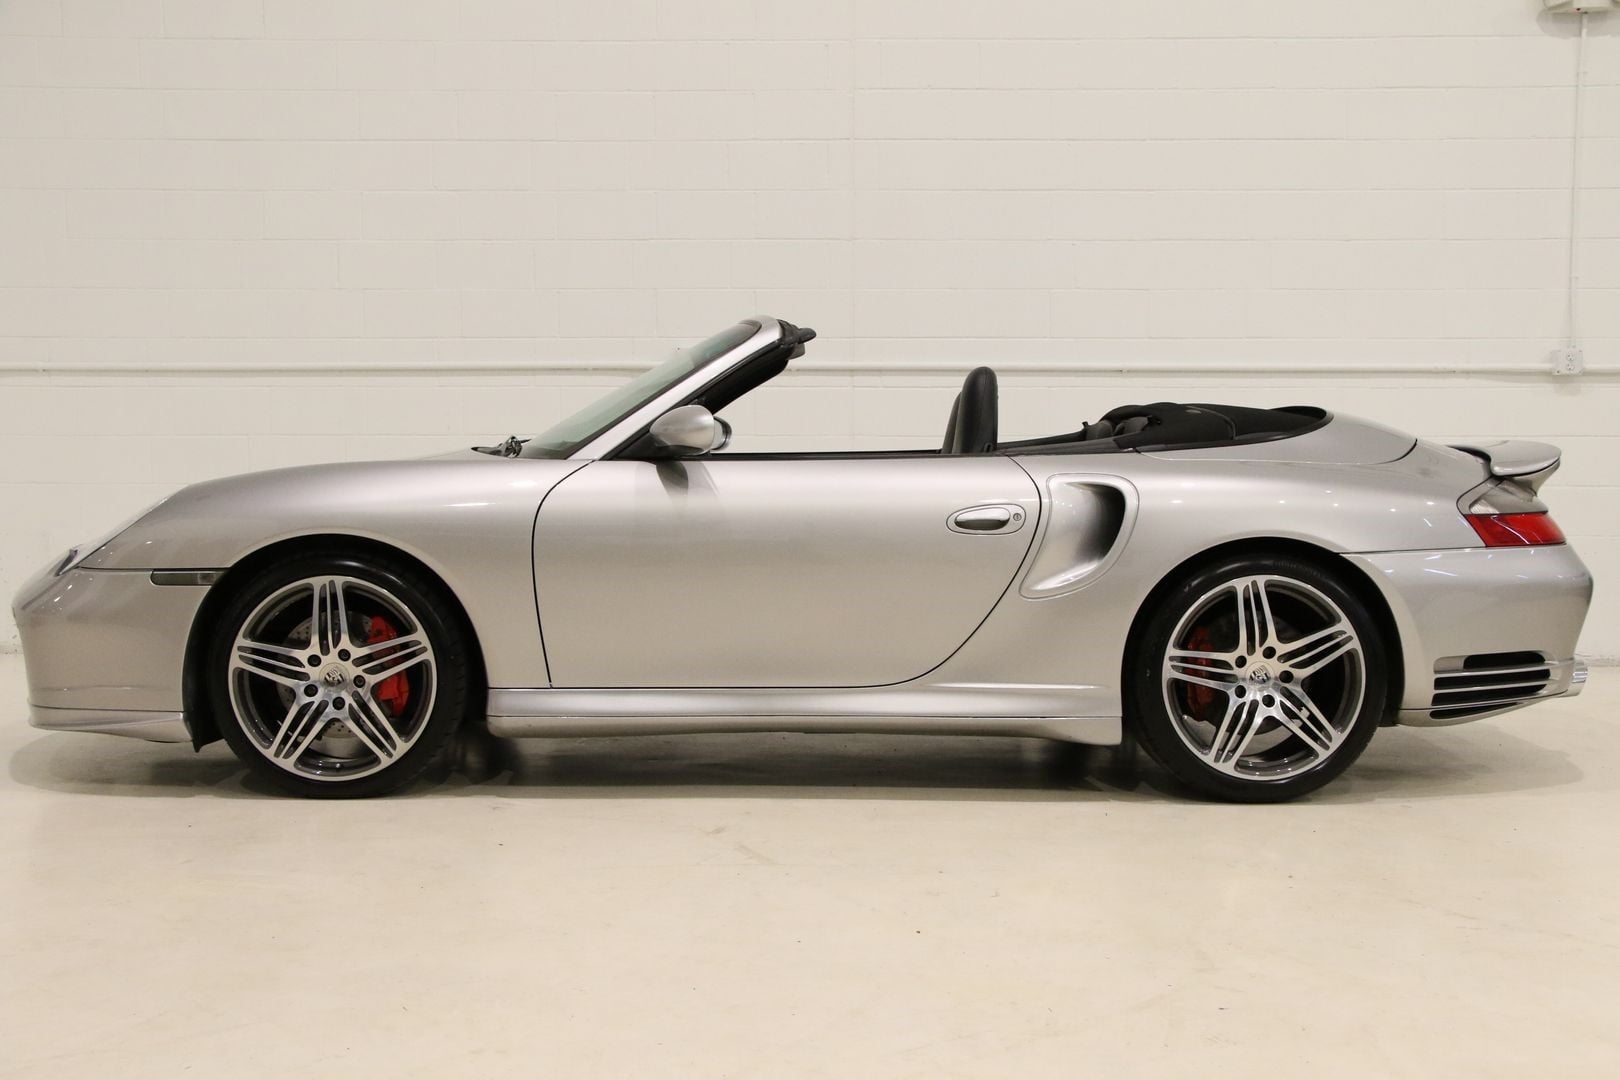 2004 Porsche 911 - Want to Trade: 2004 Porsche 911 Turbo Cabriolet (34k miles, 6 speed manual) - Used - VIN WP0CB29974S675908 - 34,000 Miles - 6 cyl - AWD - Manual - Convertible - Silver - Los Angeles, CA 90036, United States